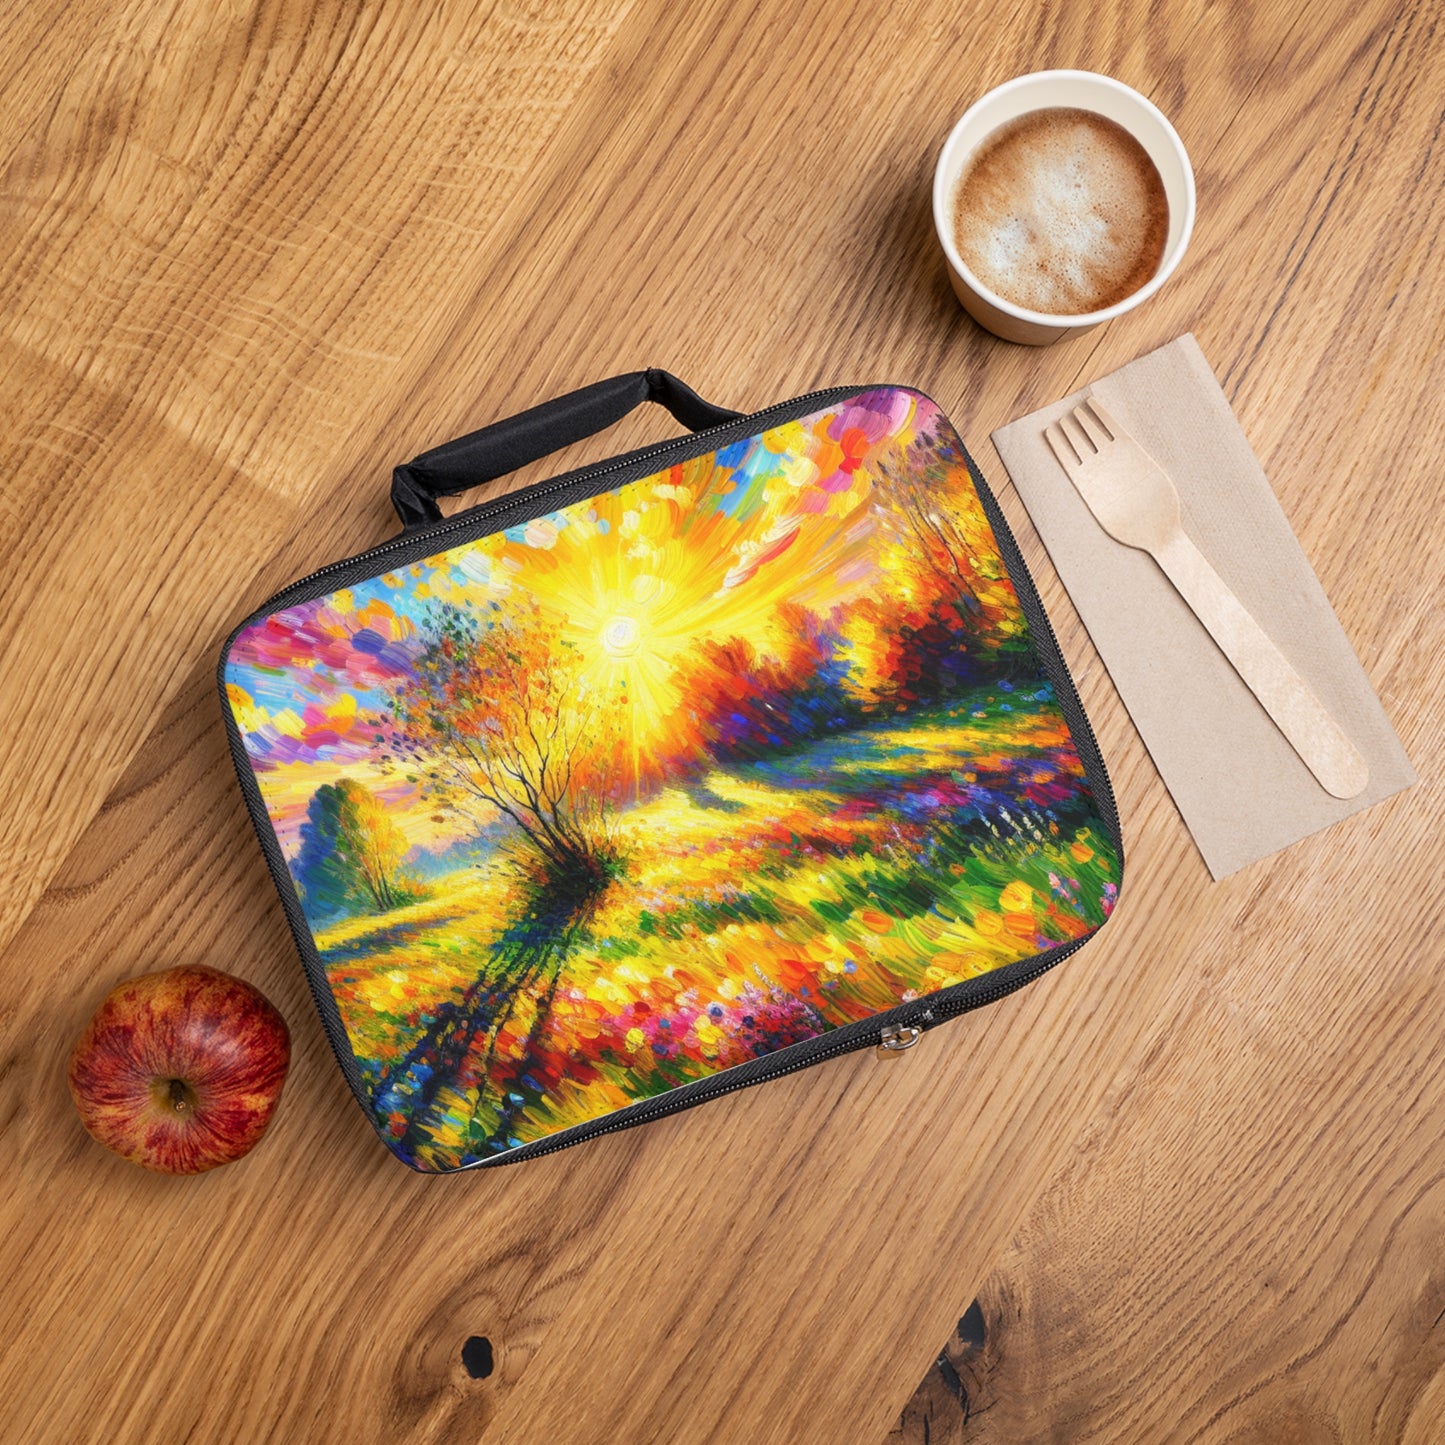 "Vibrant Springtime Sky" - The Alien Lunch Bag Fauvism Style